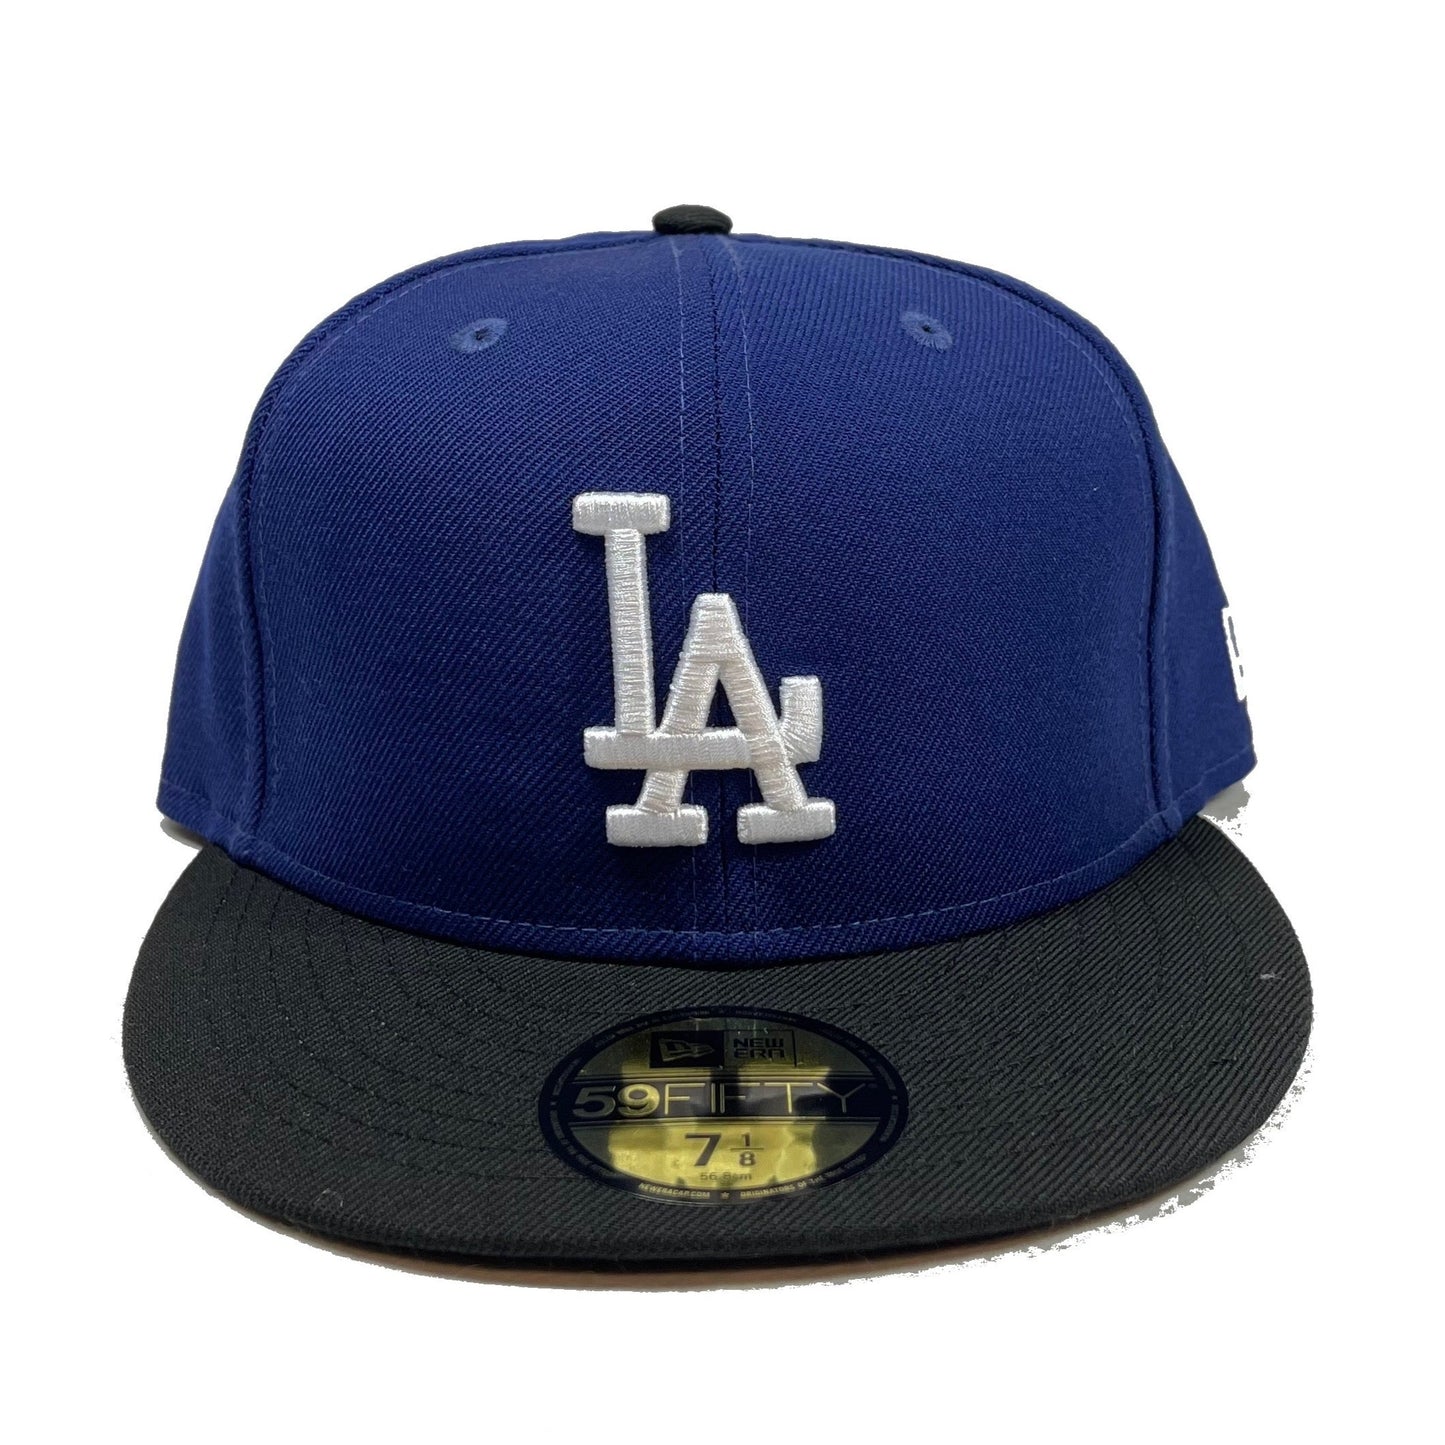 Los Angeles Dodgers (Blue/Black) Snapback/Fitted